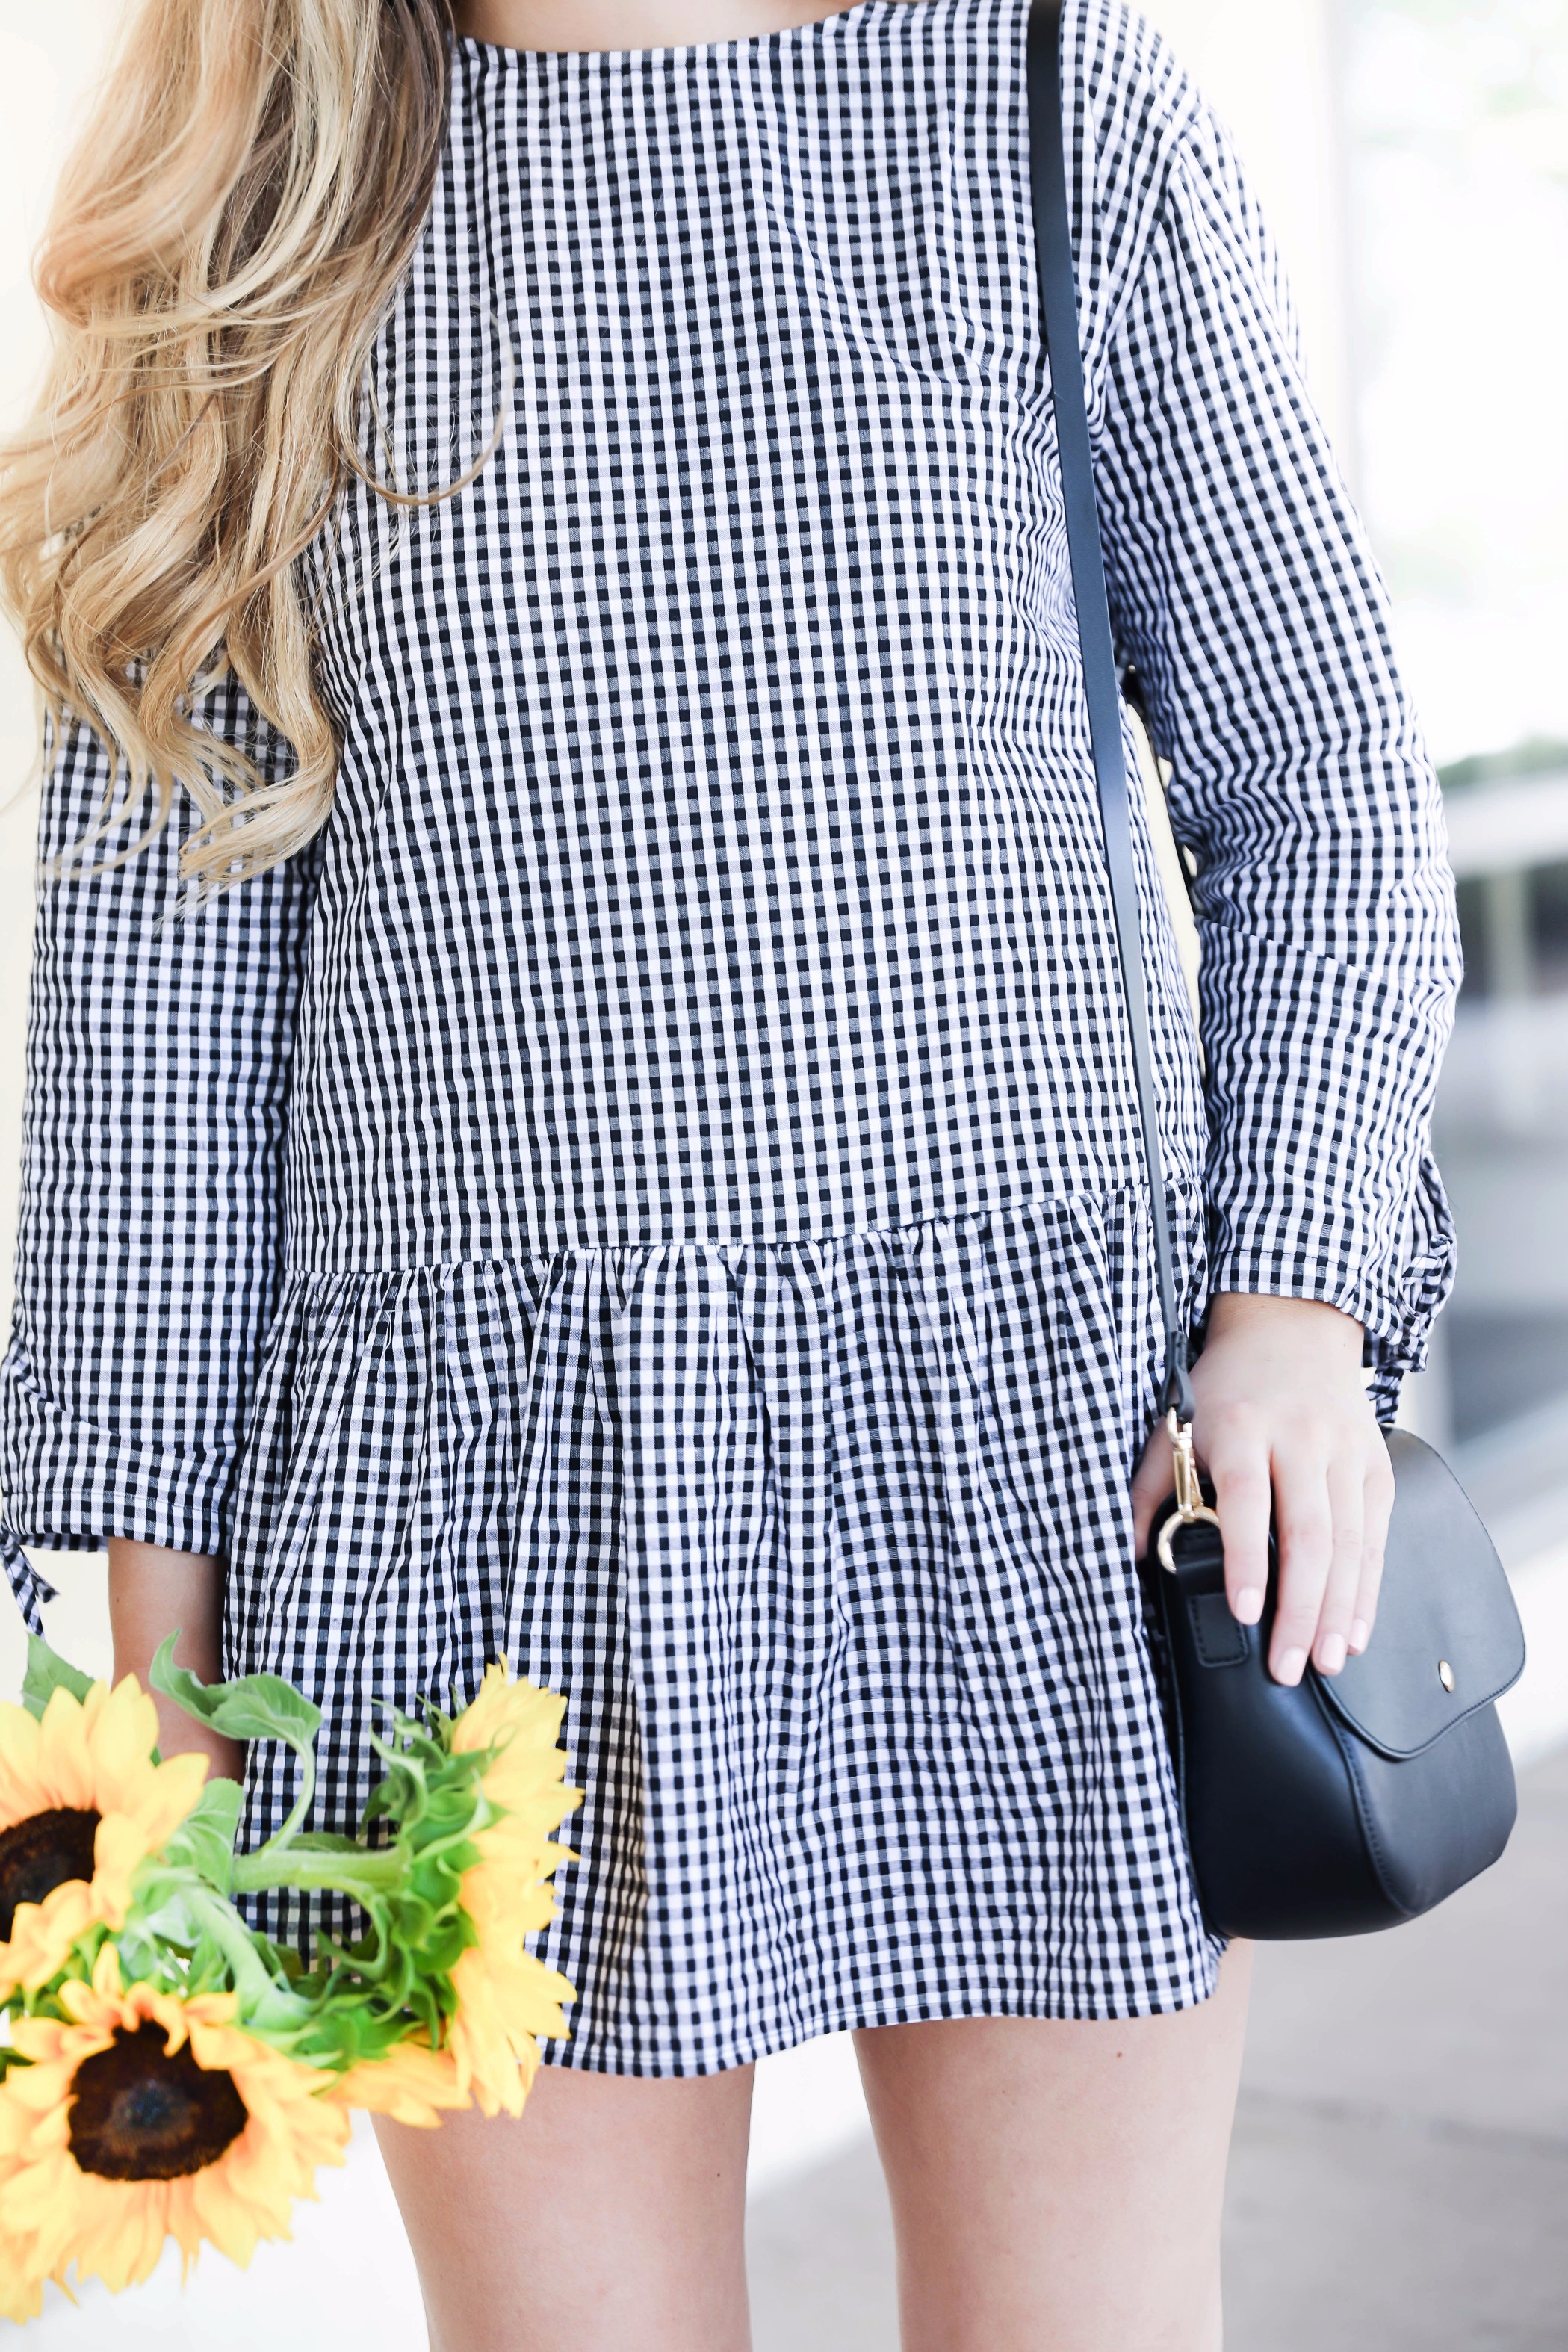 Sunflowers and gingham! The cutest low waist dress for summer transiting into fall. I can't get enough of this cute gingham dress! More details on fashion blog daily dose of charm by lauren lindmark